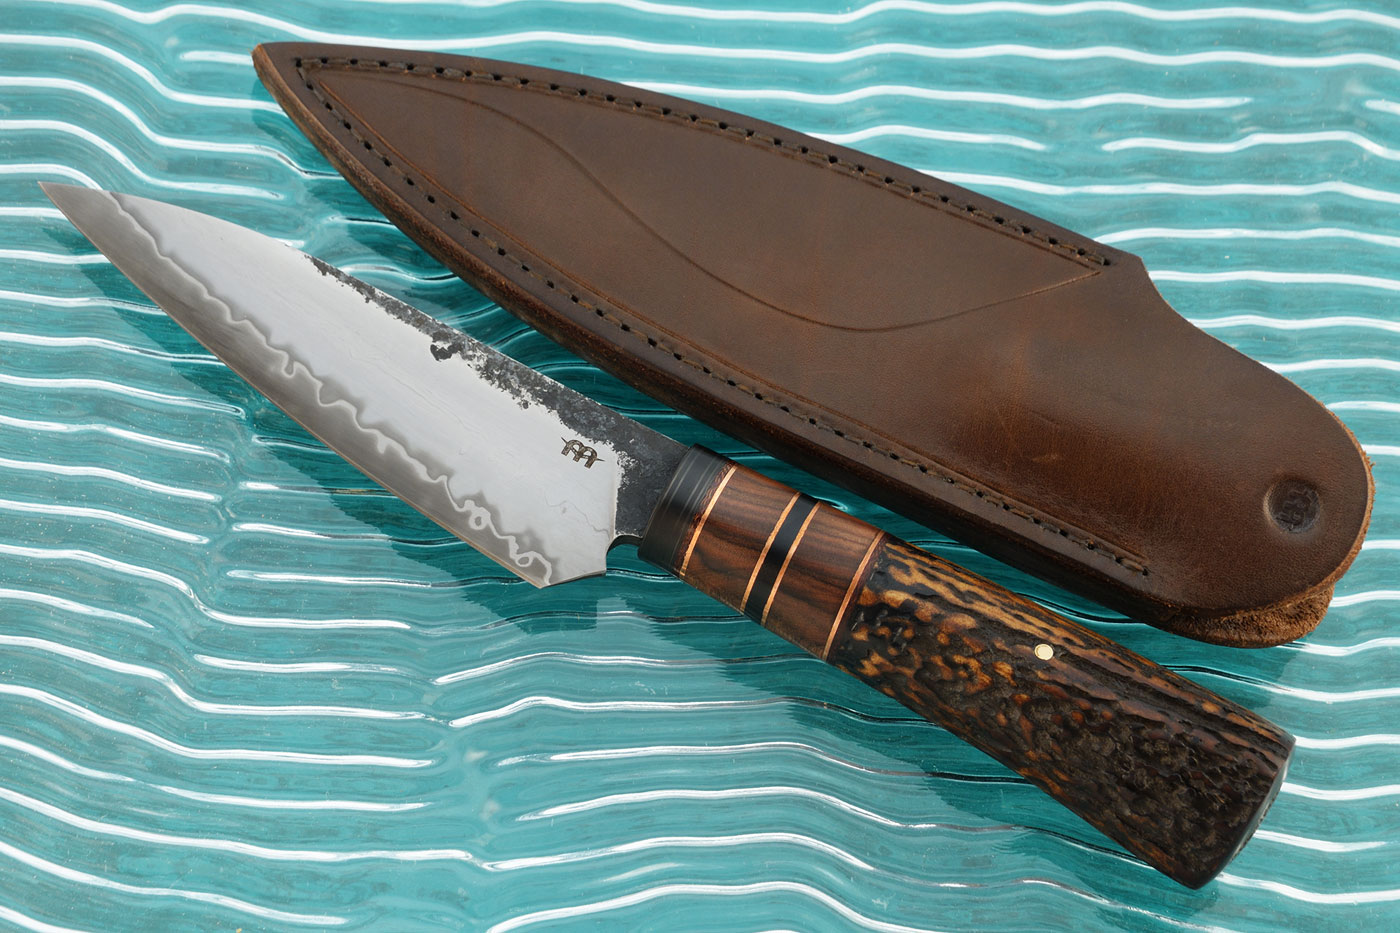 Utilitarian: San Mai Belt Knife with Madagascar Rosewood and Stag